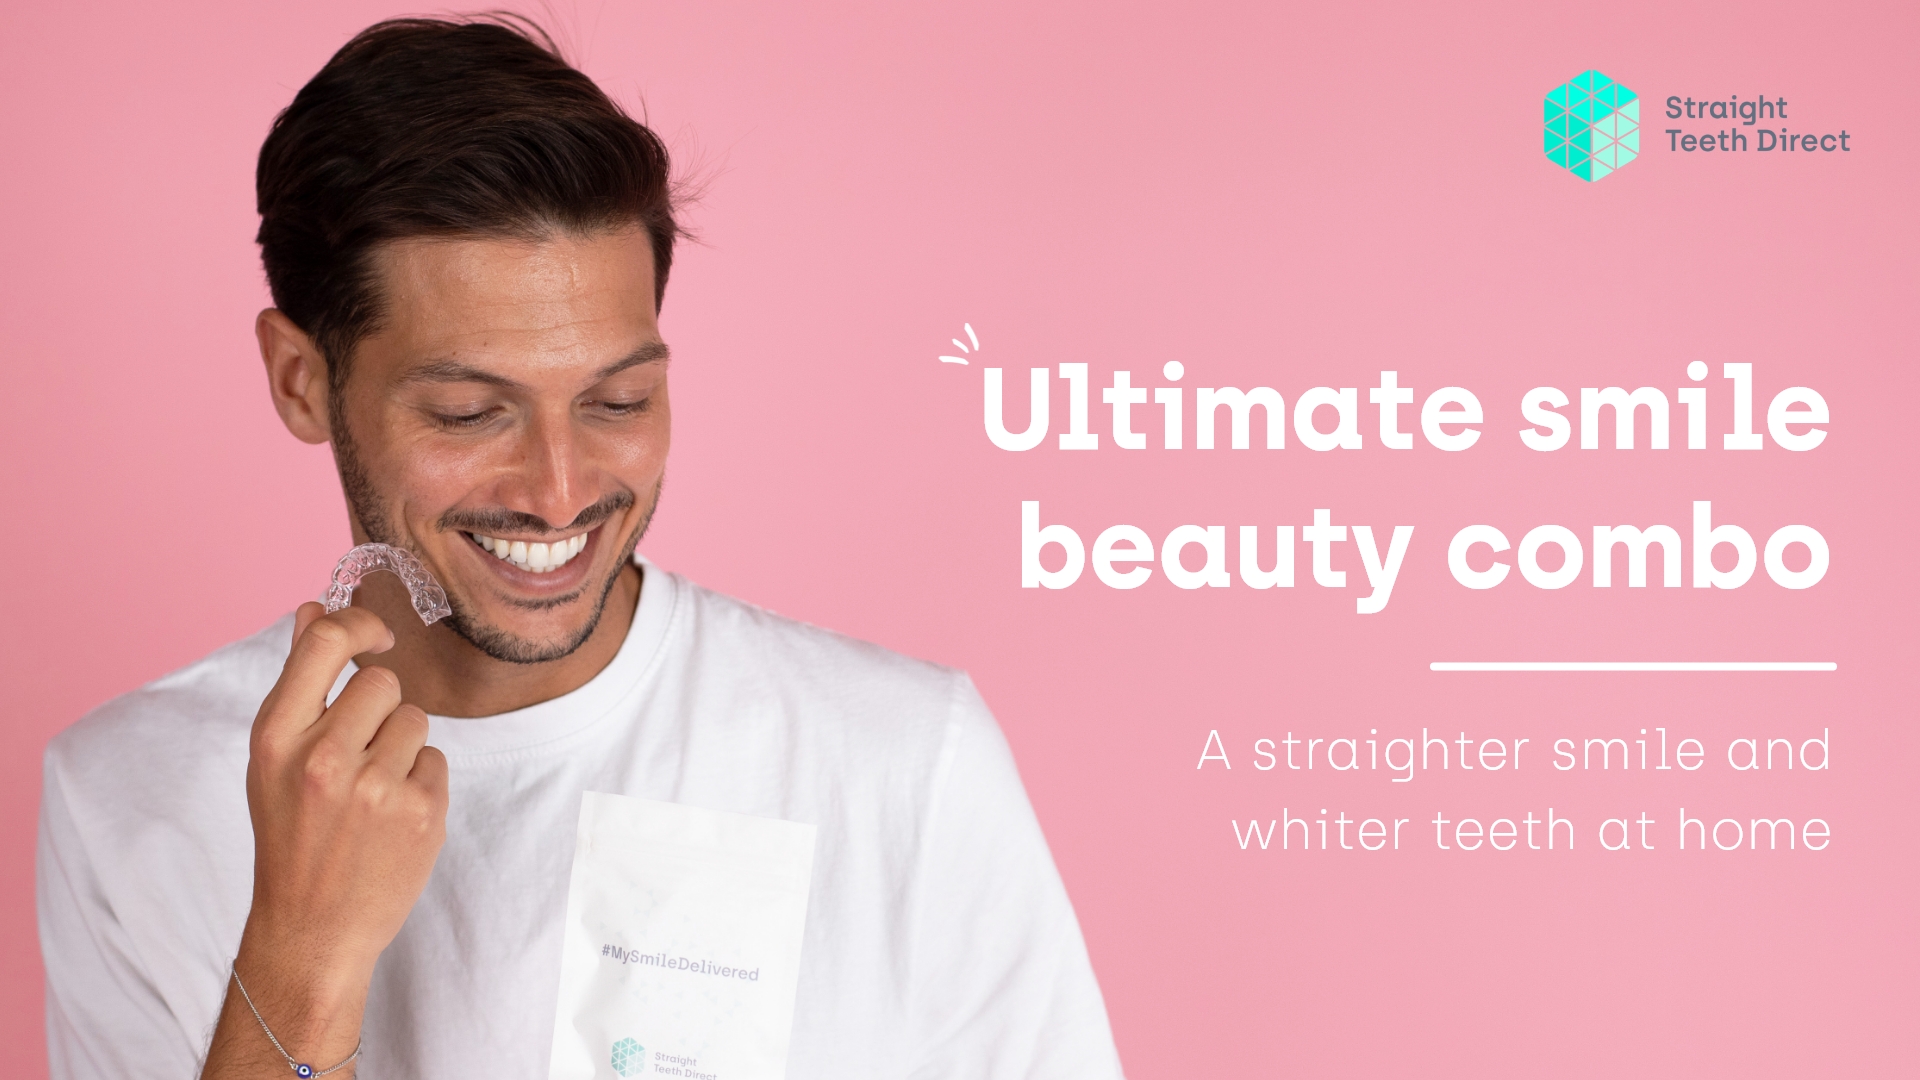 Get a straighter smile and whiter teeth at home